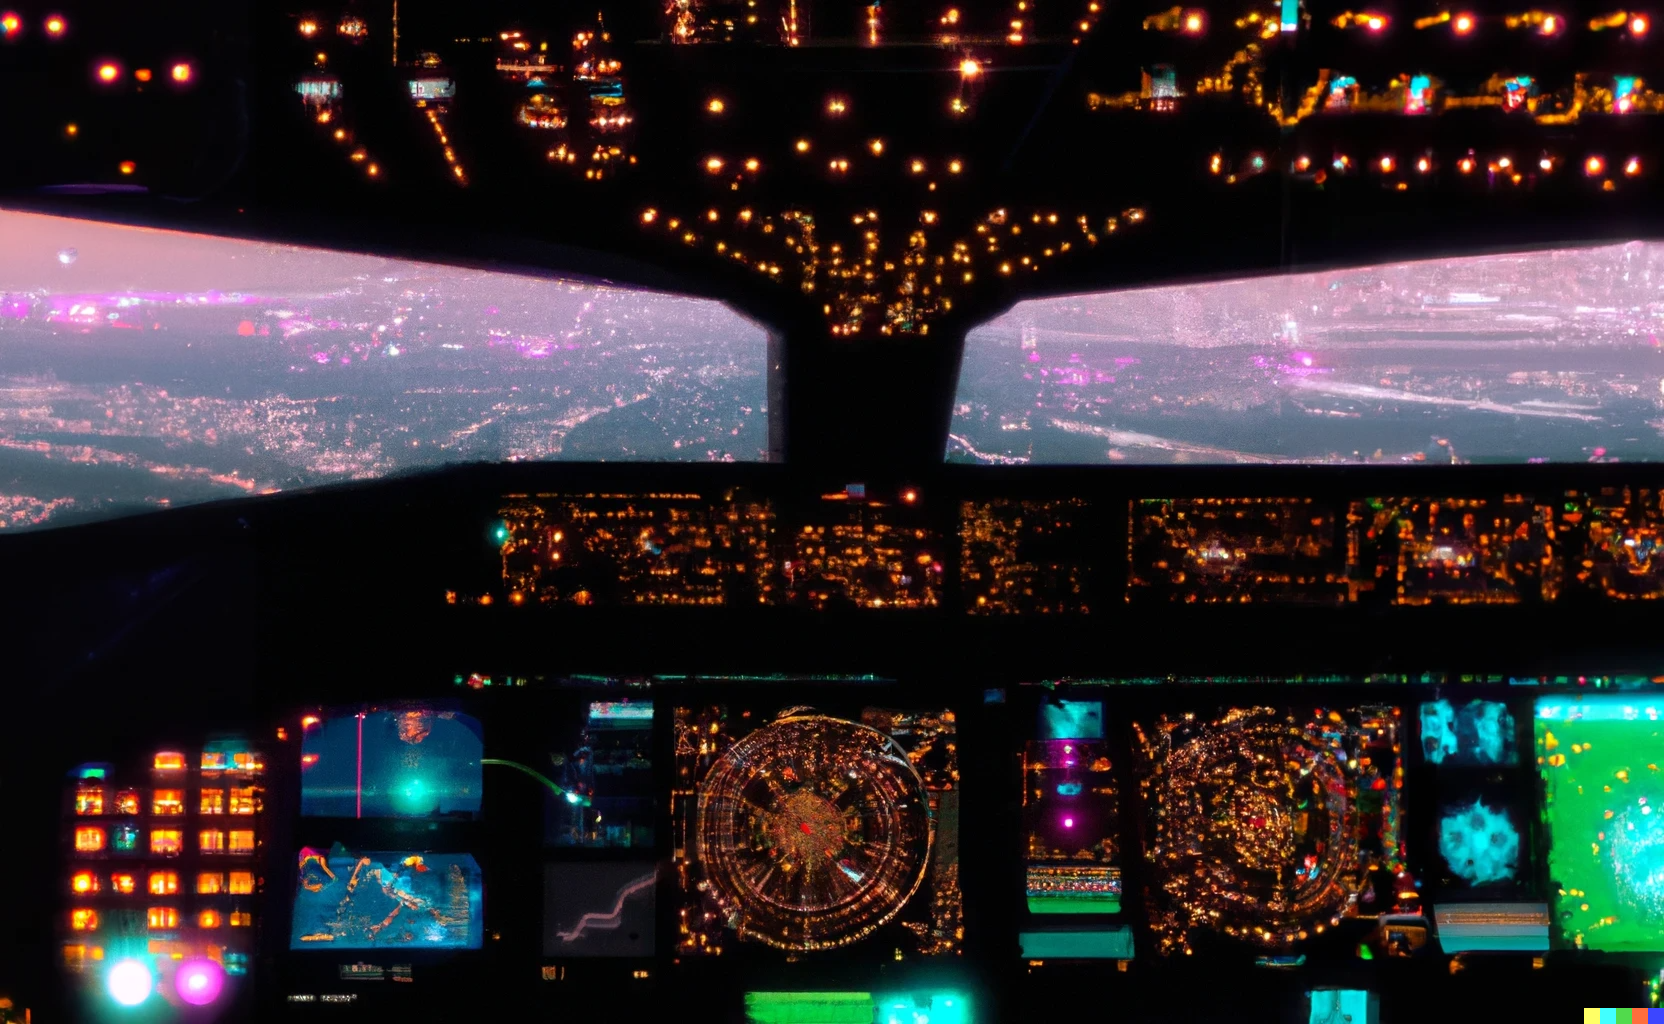 A modern airline cockpit view, with the windshield revealing an intricate web of glowing nodes and connections, symbolizing system feedback loops. Faint outlines of Middle Eastern landmarks appear on the horizon. Transparent digital panels overlay the view, showing graphs of fuel costs, ticket pricing, and passenger demand, conveying a world of complex challenges.